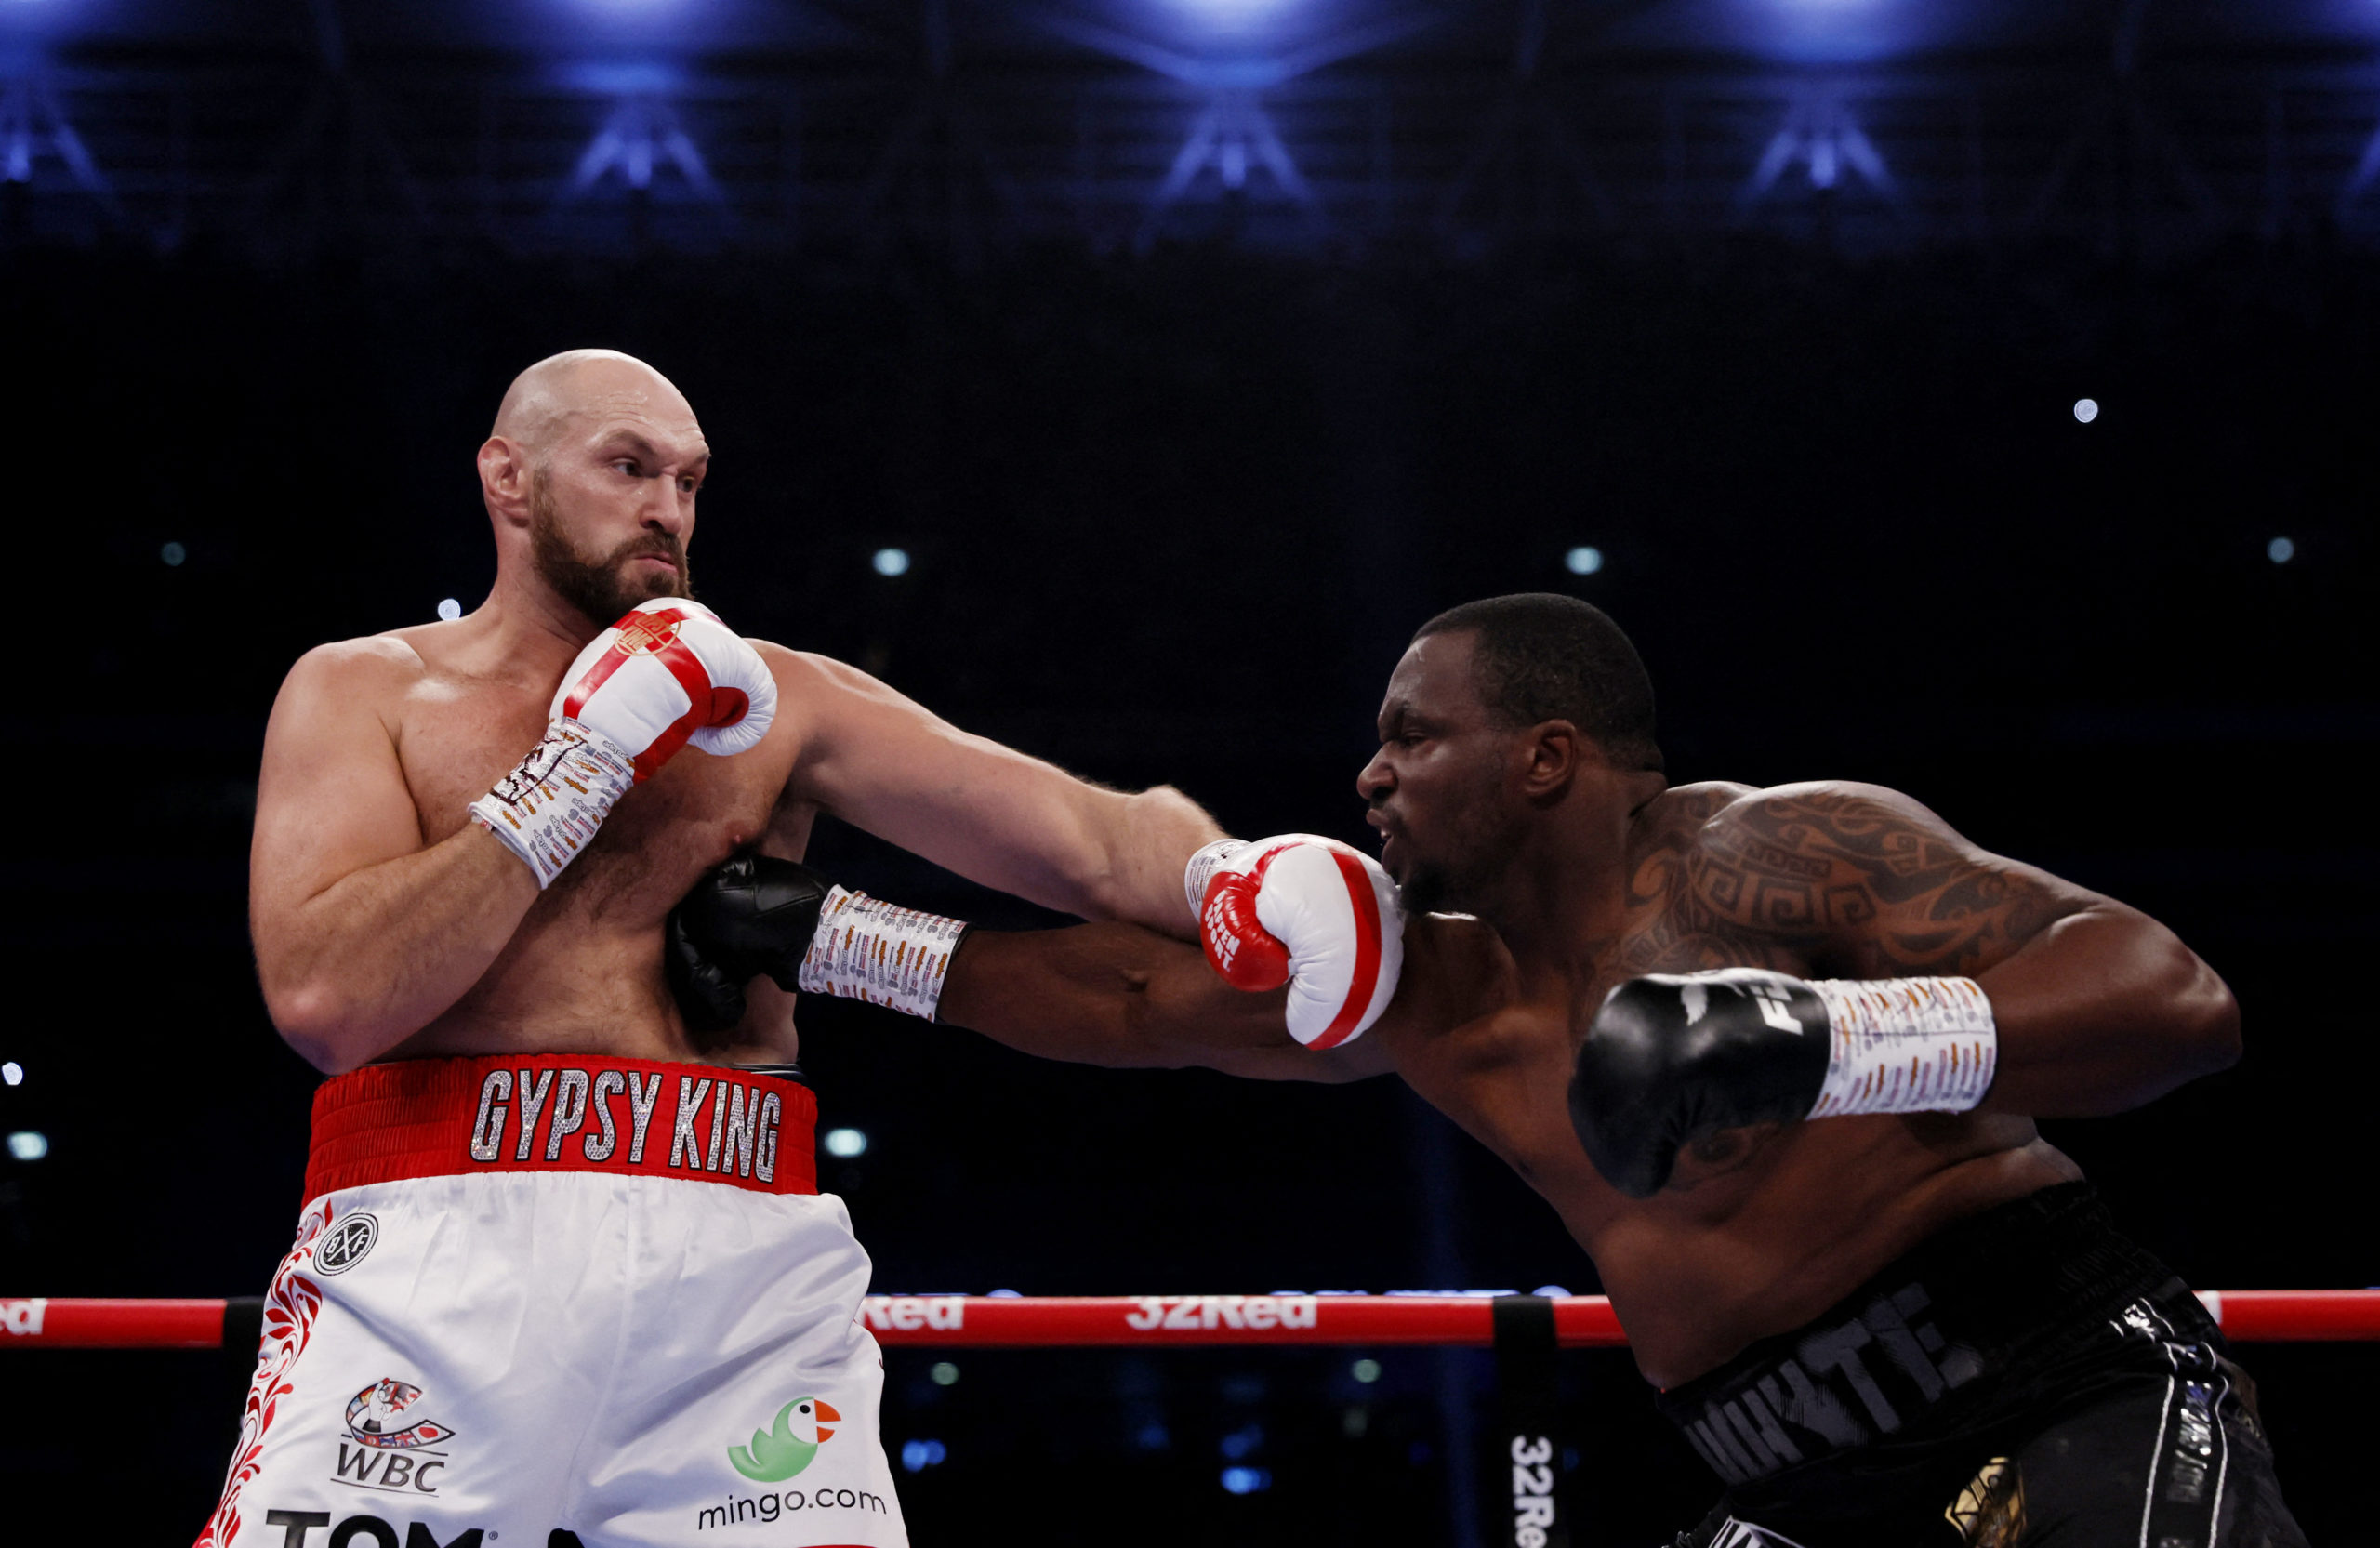 FILE PHOTO: Boxing - Tyson Fury v Dillian Whyte - WBC World Heavyweight Title - Wembley Stadium, London, Britain - April 23, 2022  Tyson Fury in action against Dillian Whyte 